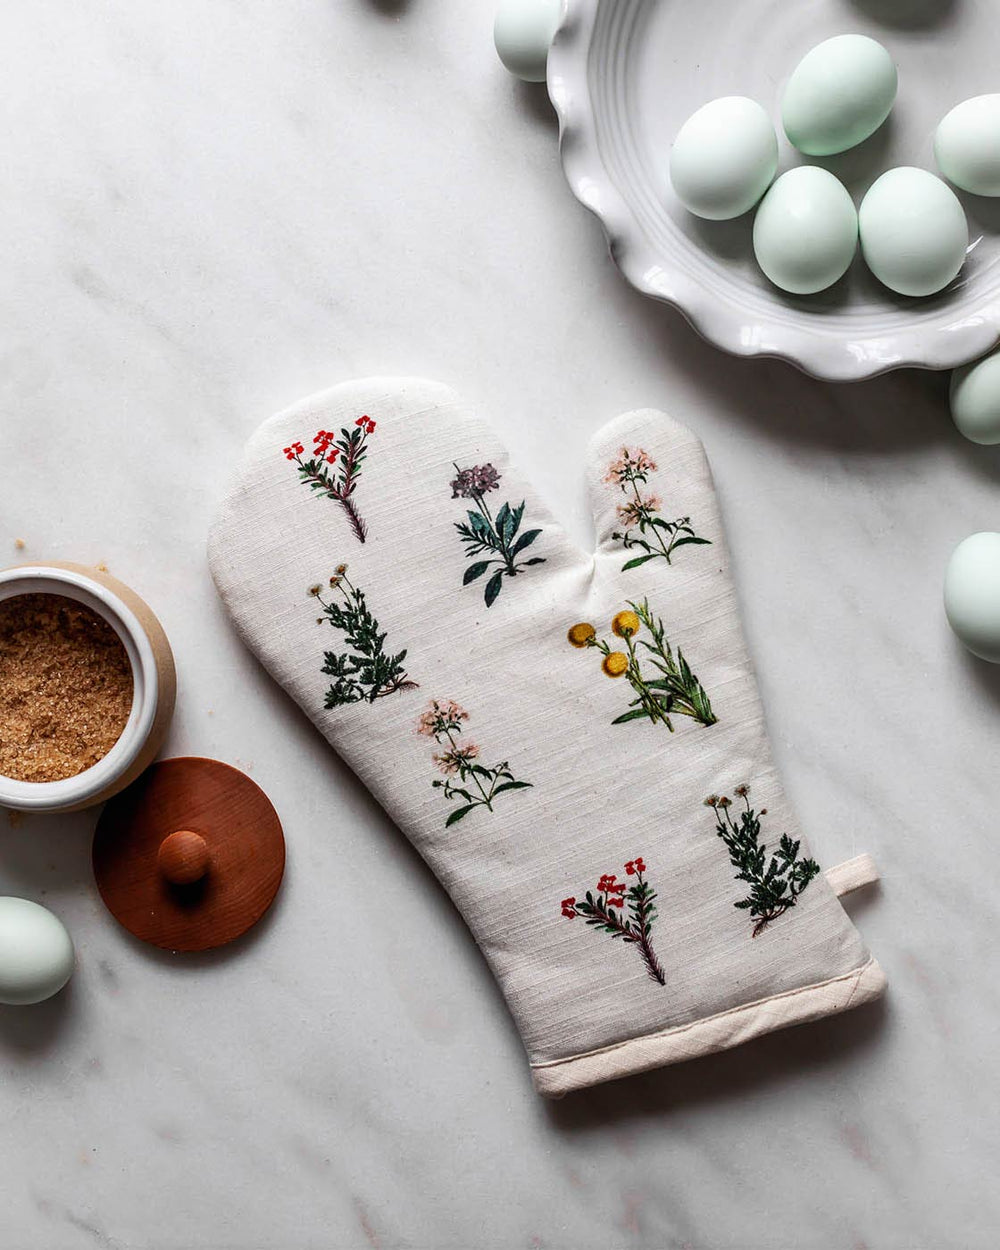 48 Wholesale Christmas Oven Mitt - at 